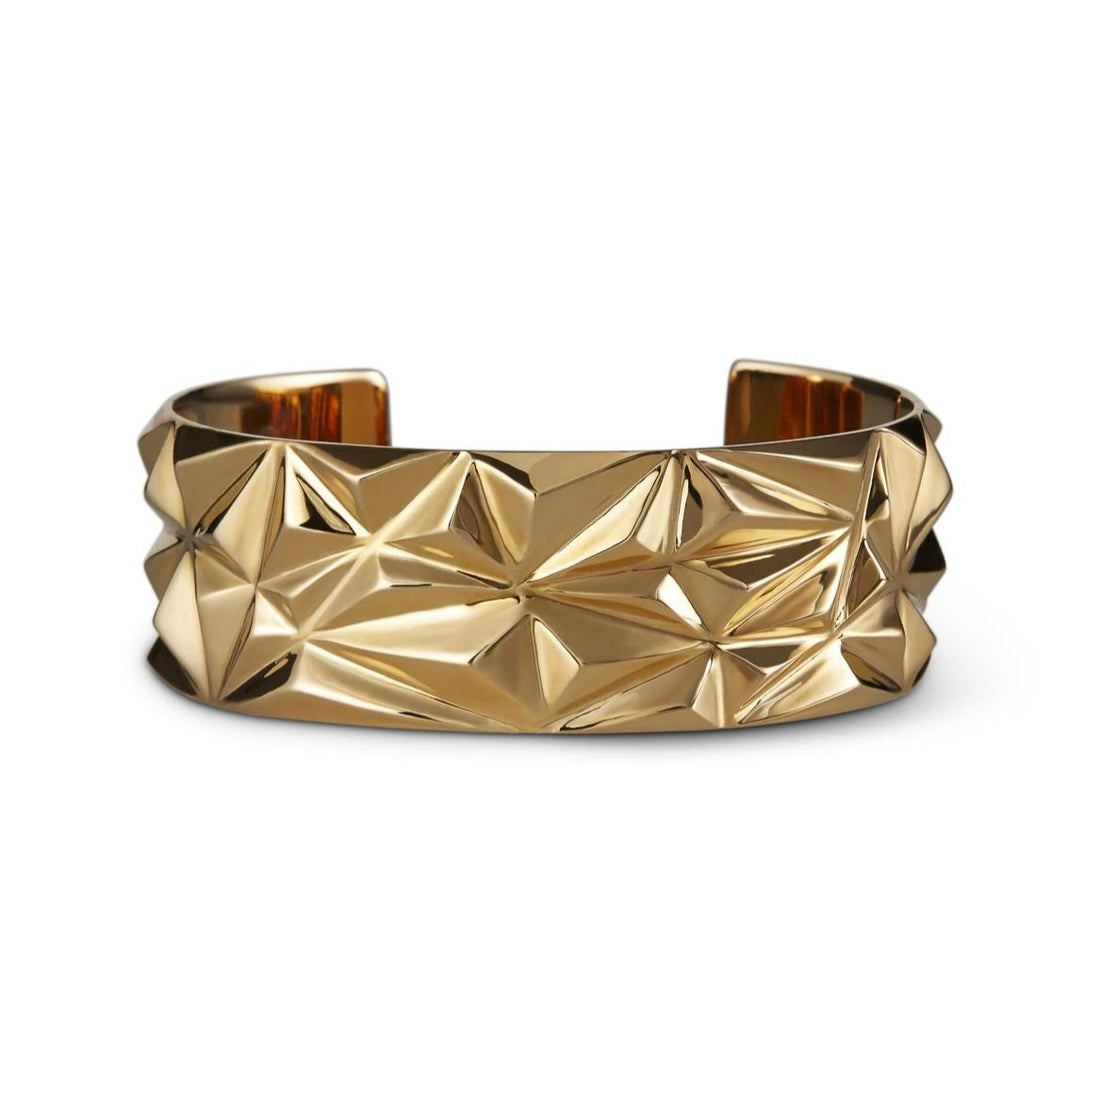 Bena Jewelry Bold Braclet Vermeil Gold Silver Plated Chiseled Collection Montreal Made in Canada